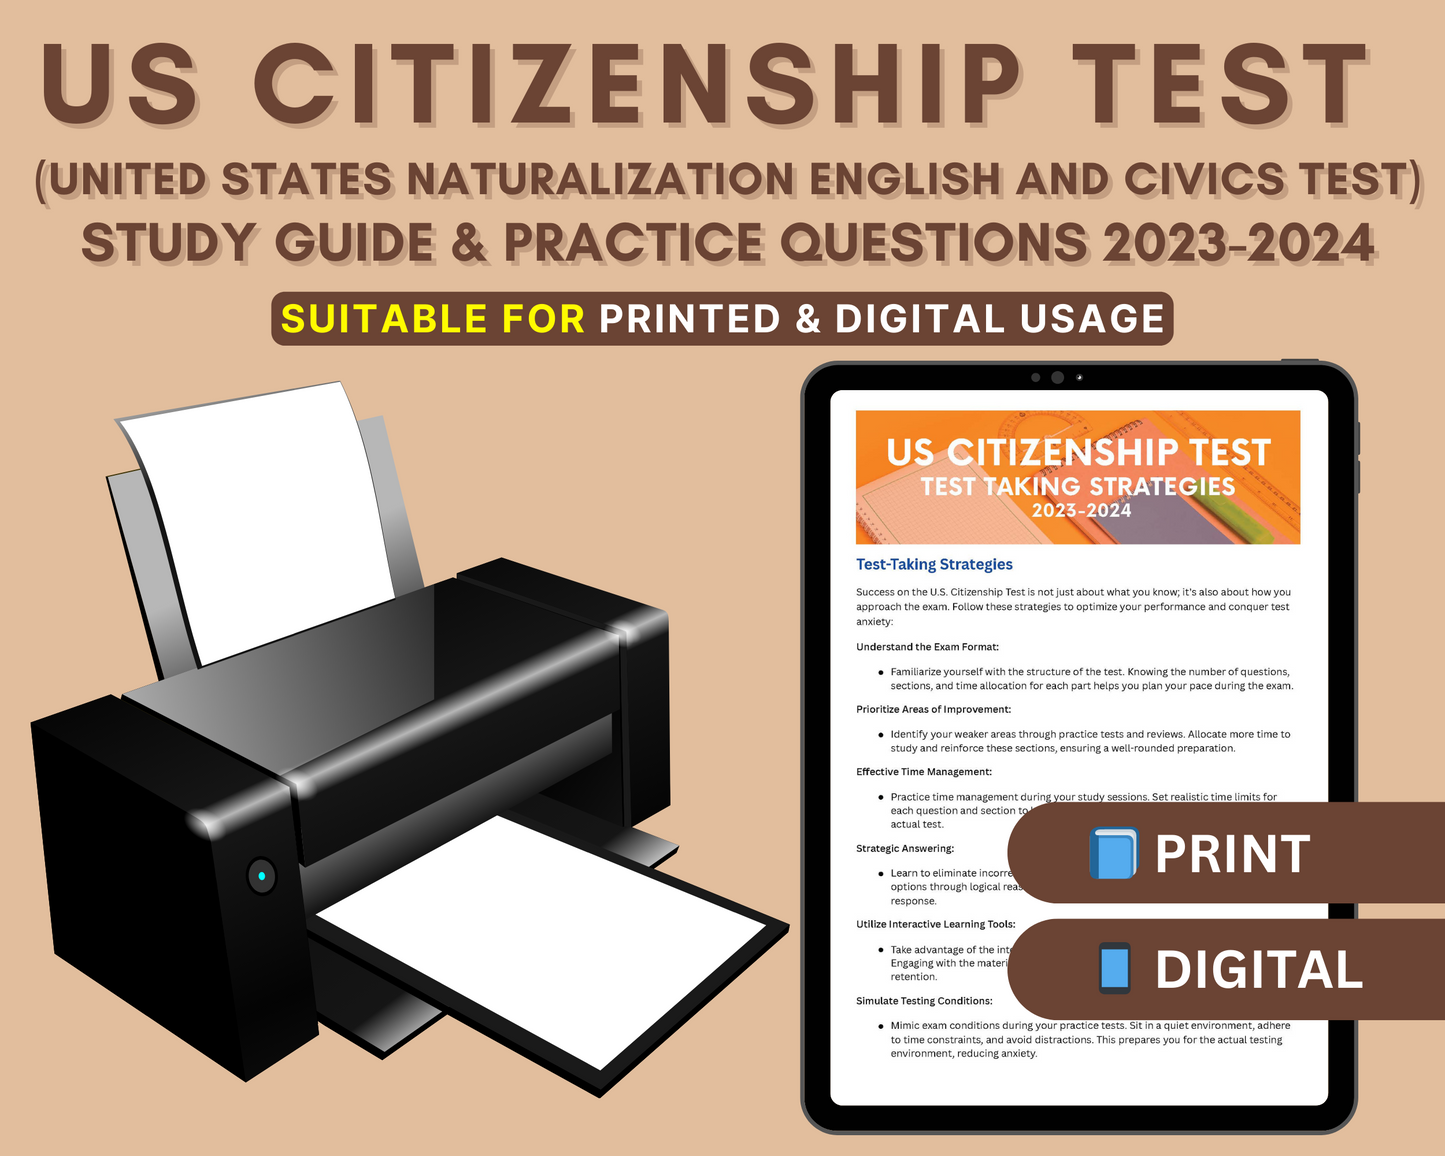 US Citizenship Test Study Guide 2023-24: In-Depth Content Review & Practice Tests - Your Citizenship Journey Starts Here